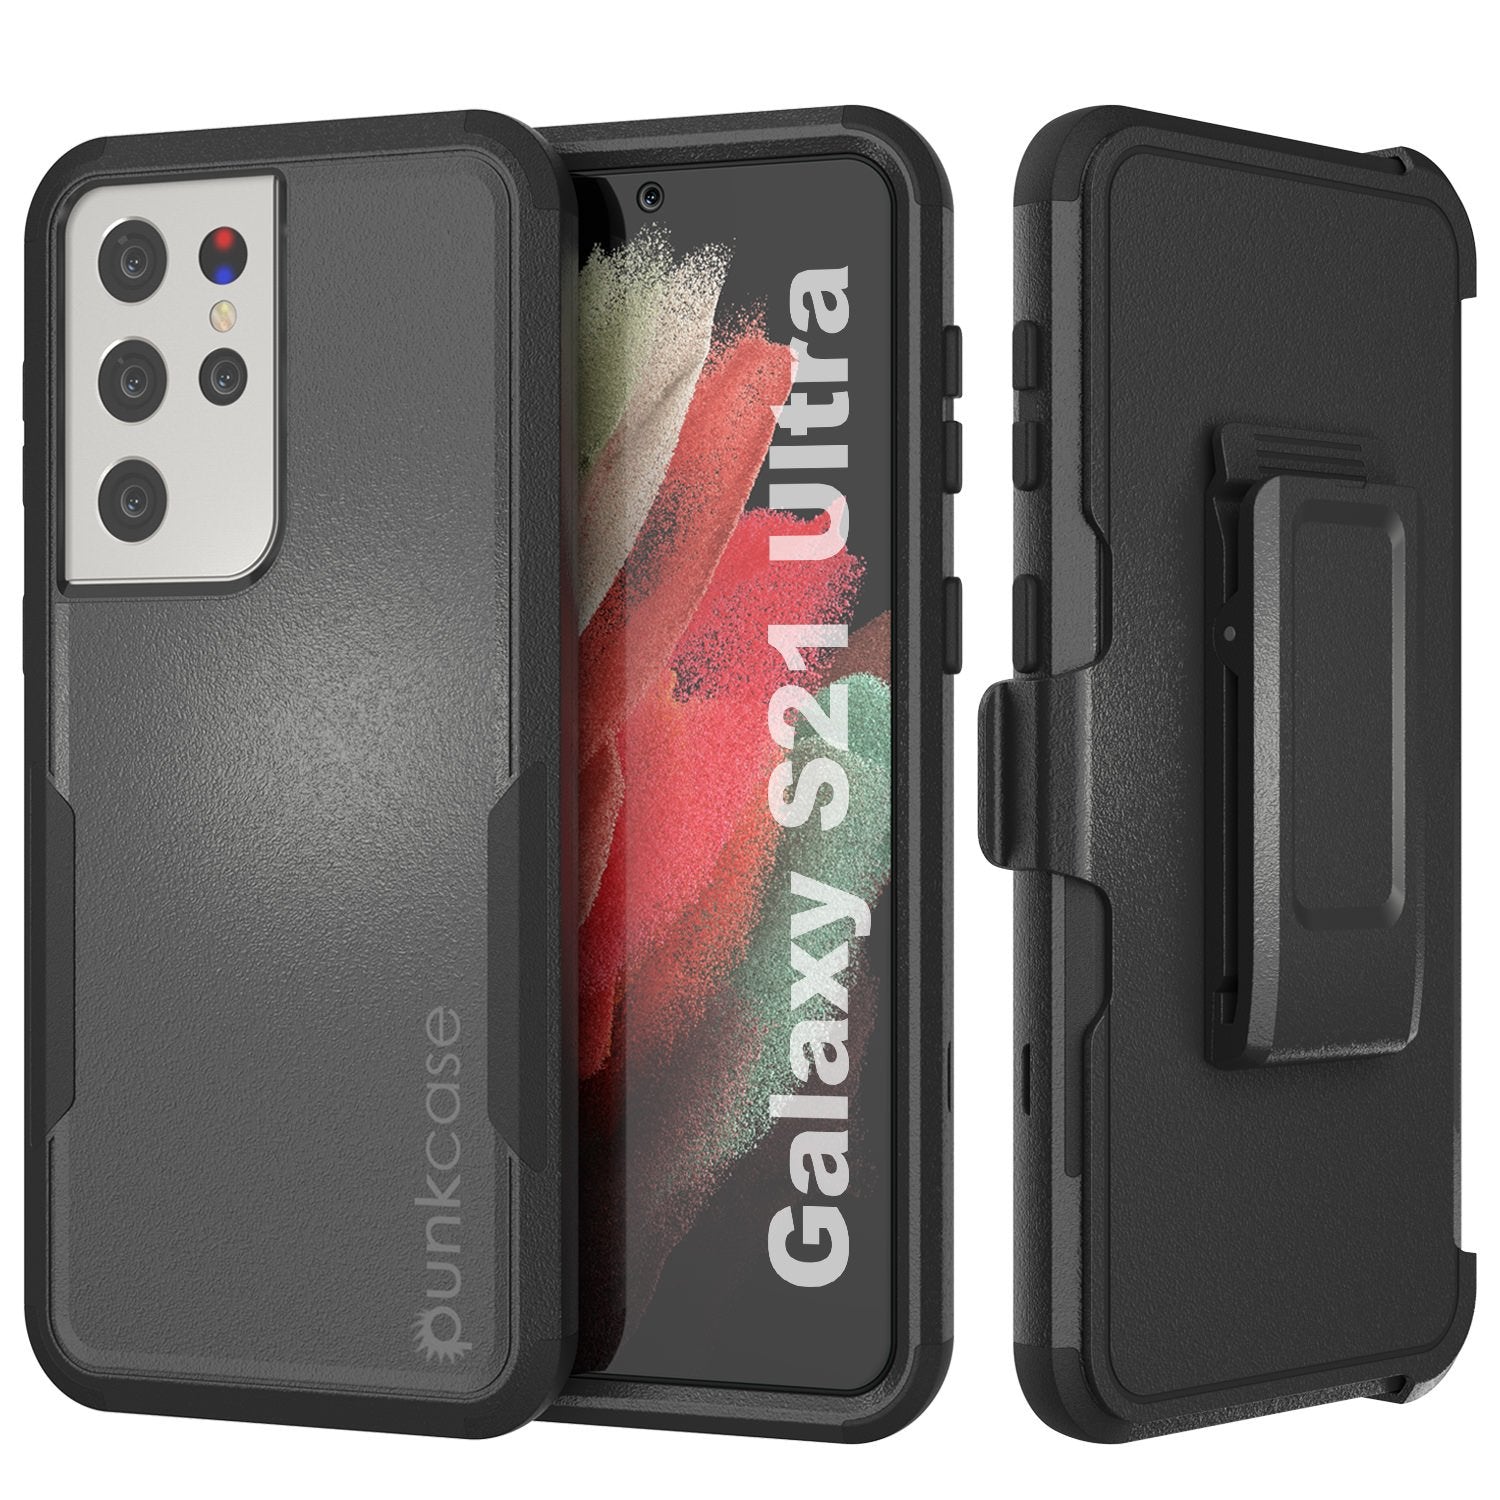 Punkcase for Galaxy S21 Ultra 5G Belt Clip Multilayer Holster Case [Patron Series] [Black]